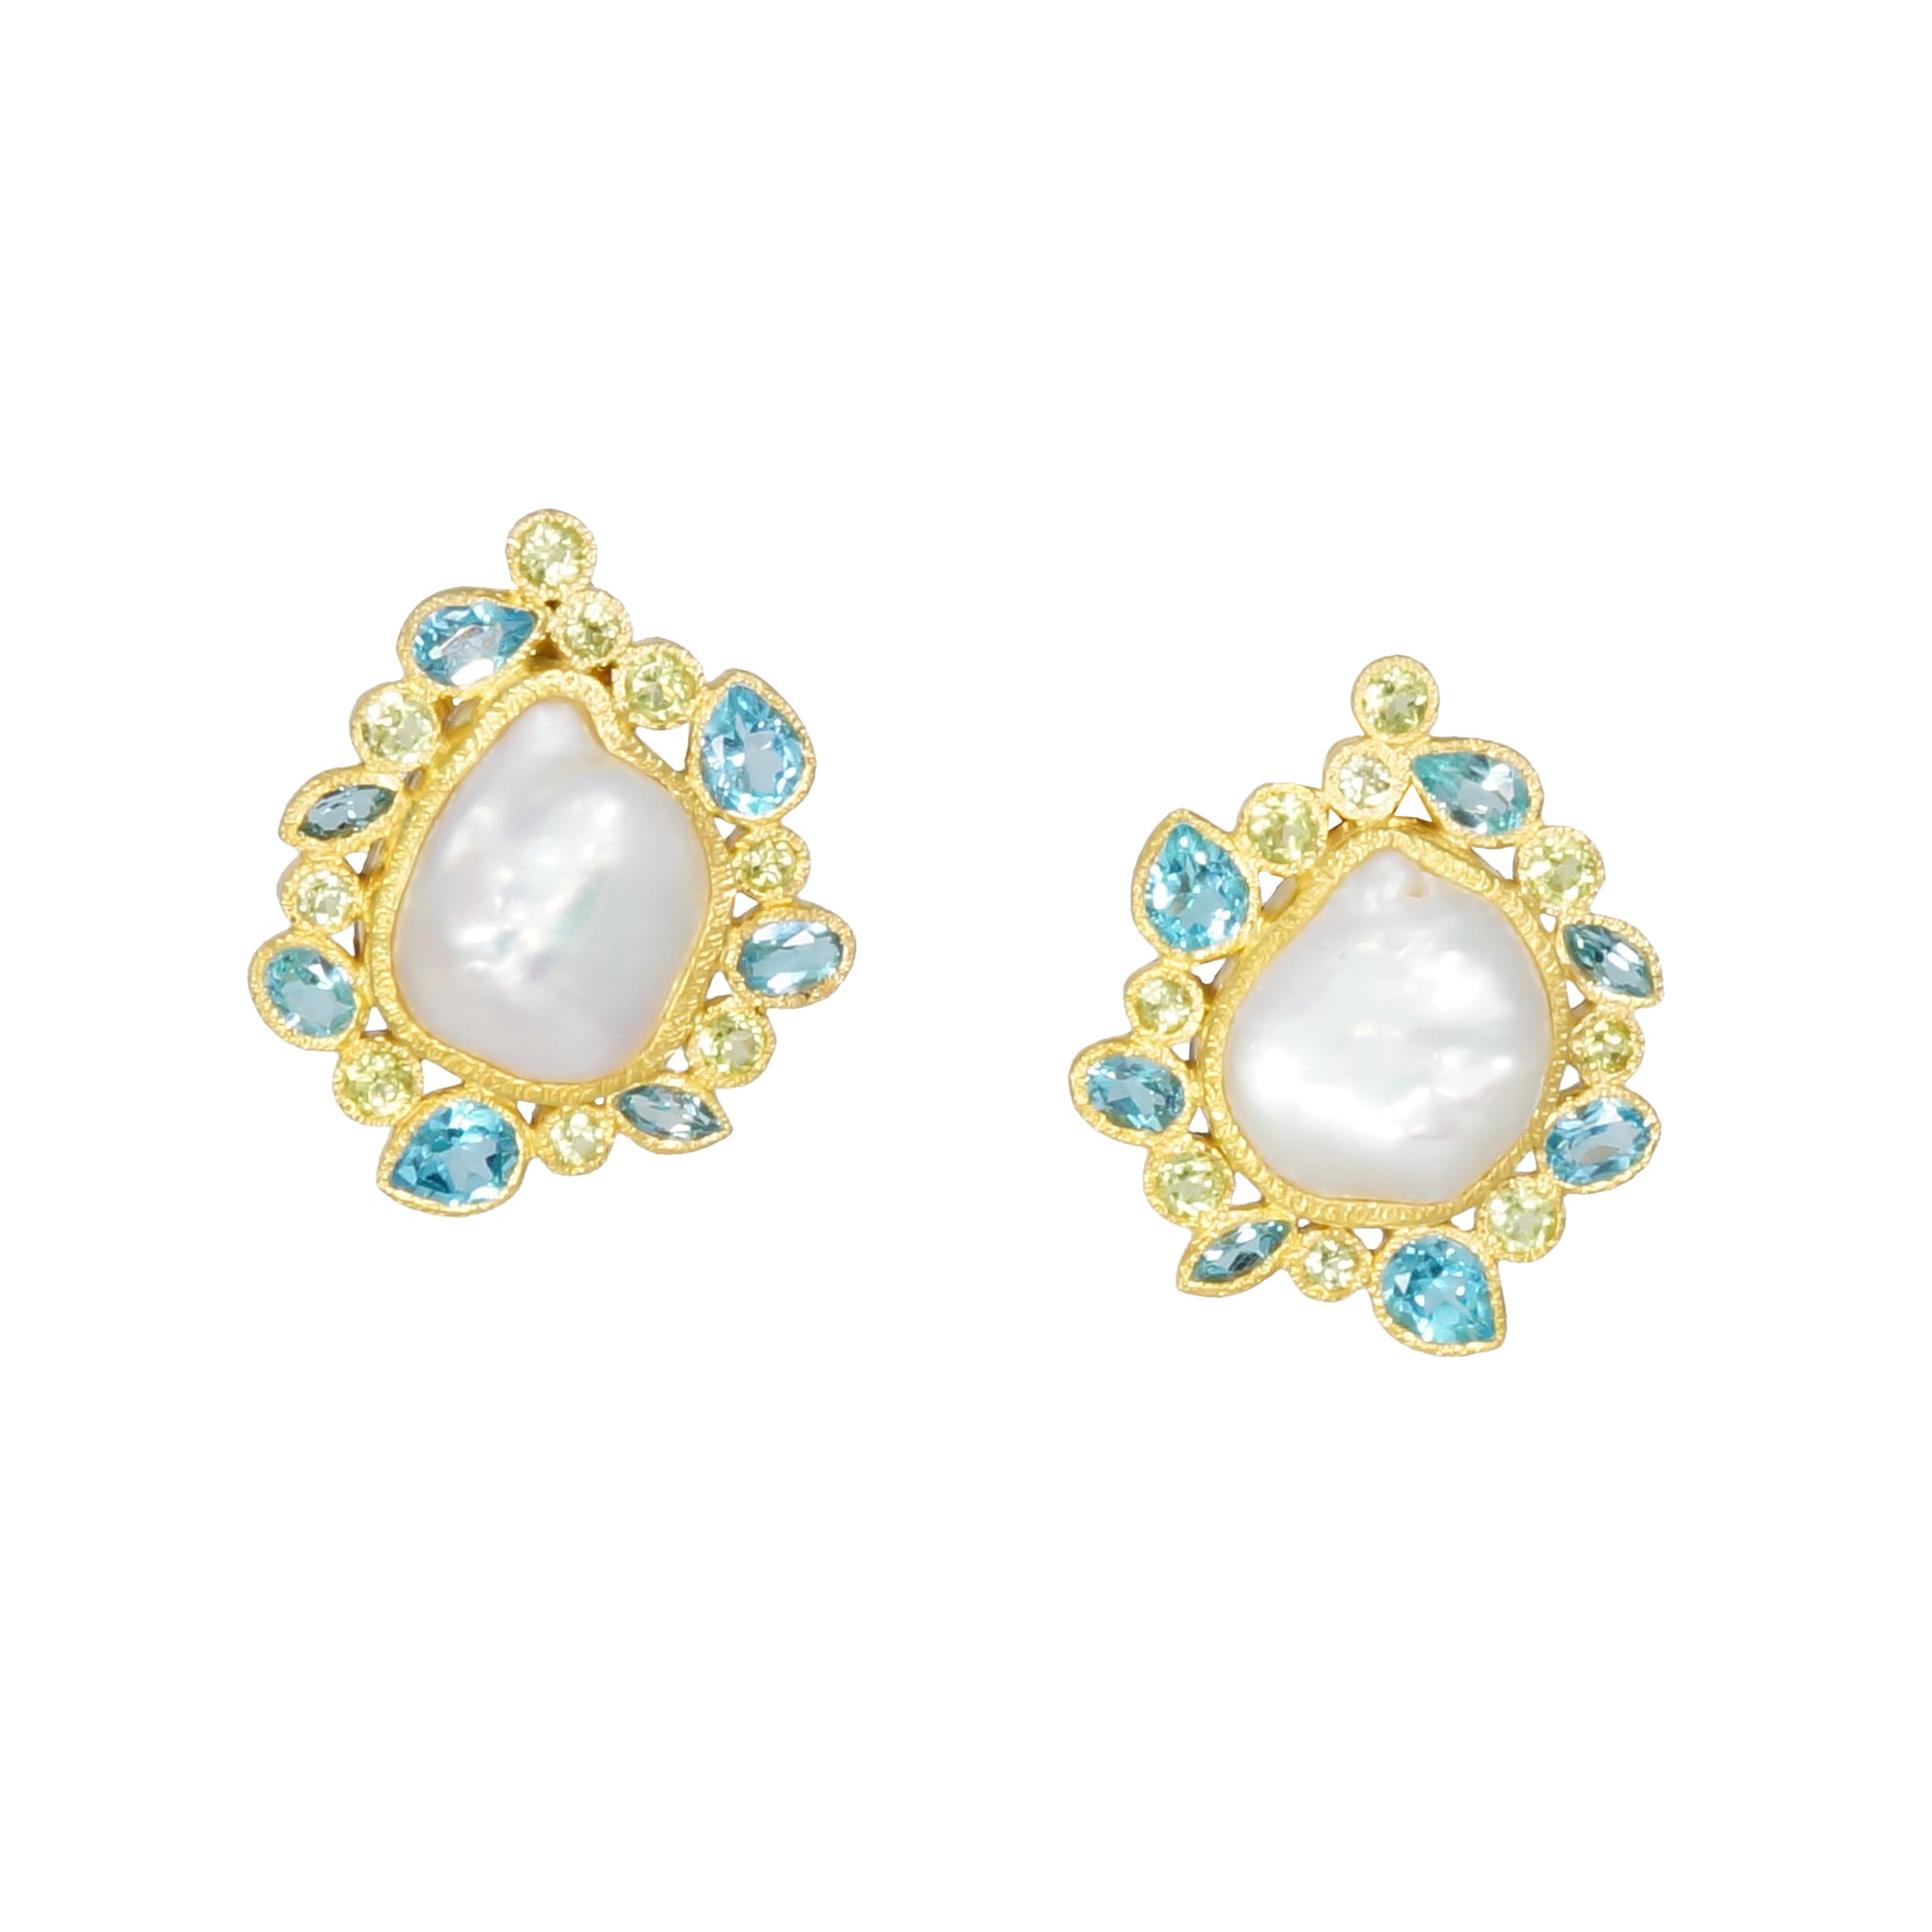 14k Gold and Baroque Pearl Earrings ~ Dream of Moorea